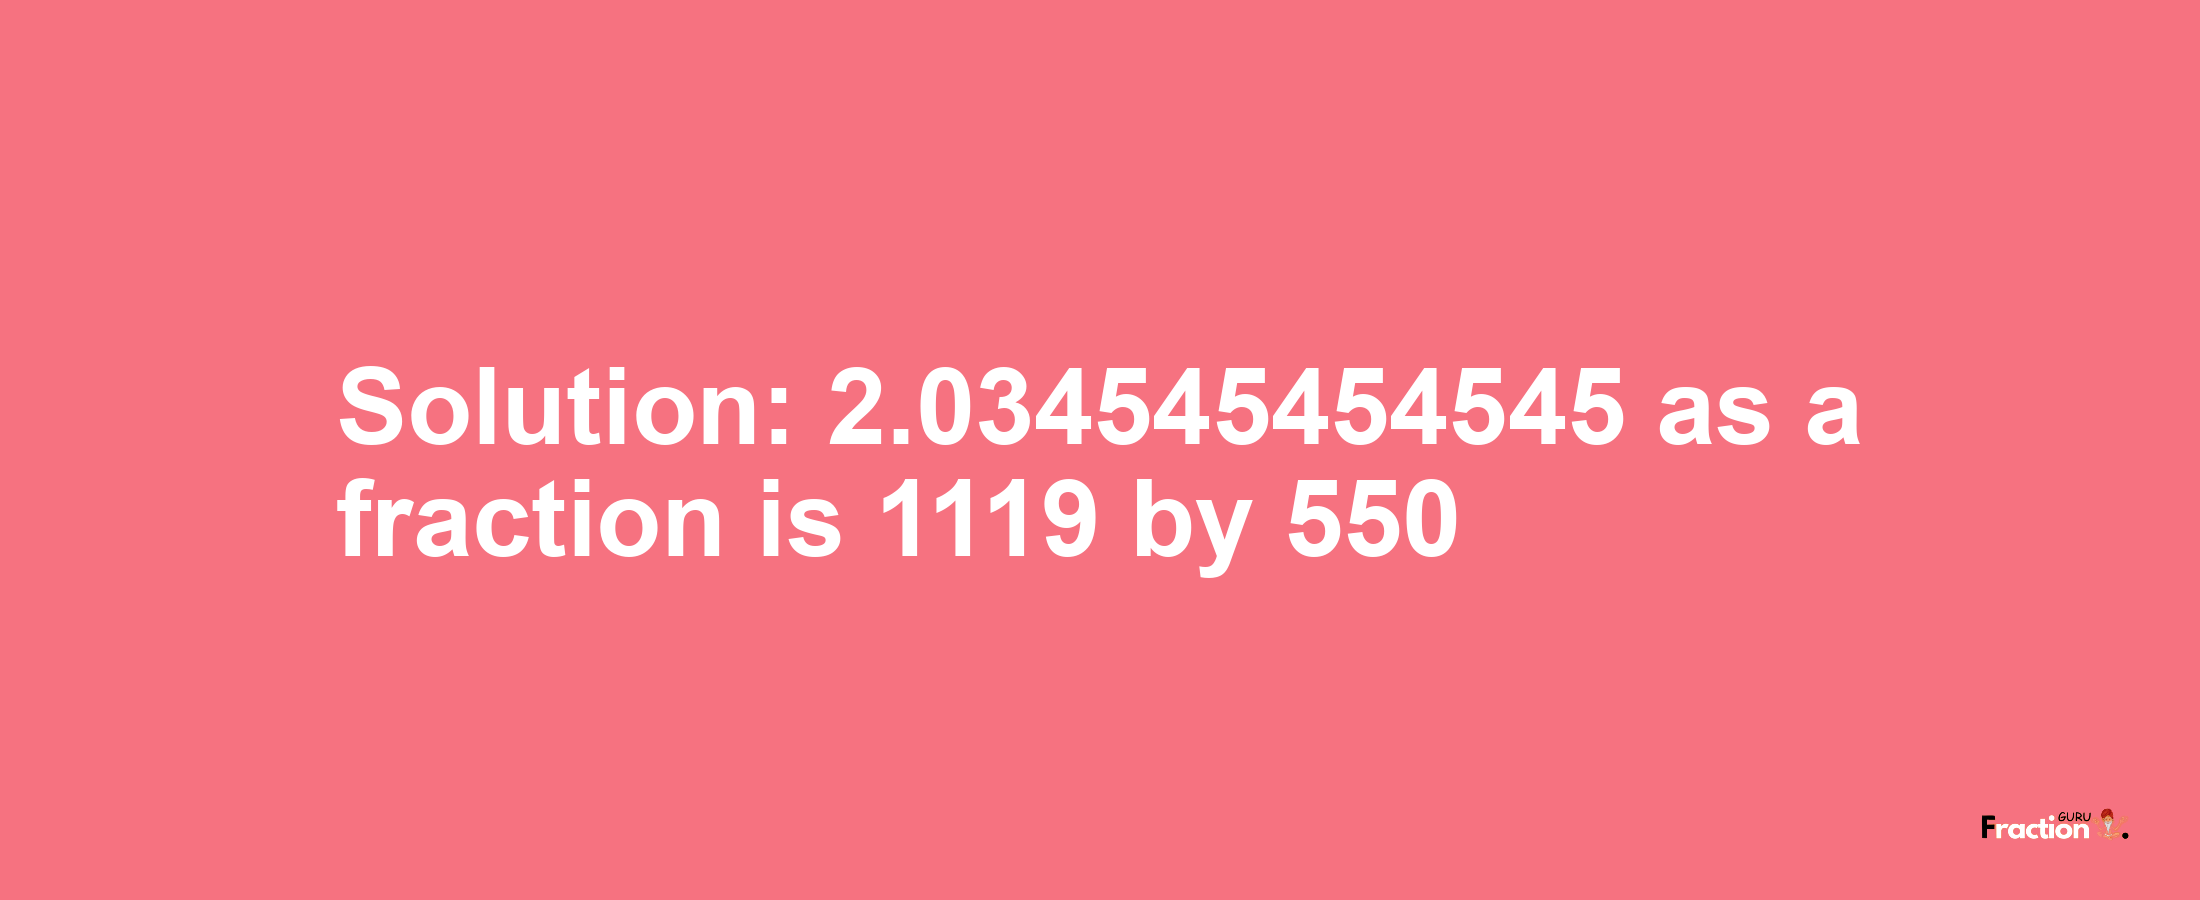 Solution:2.034545454545 as a fraction is 1119/550